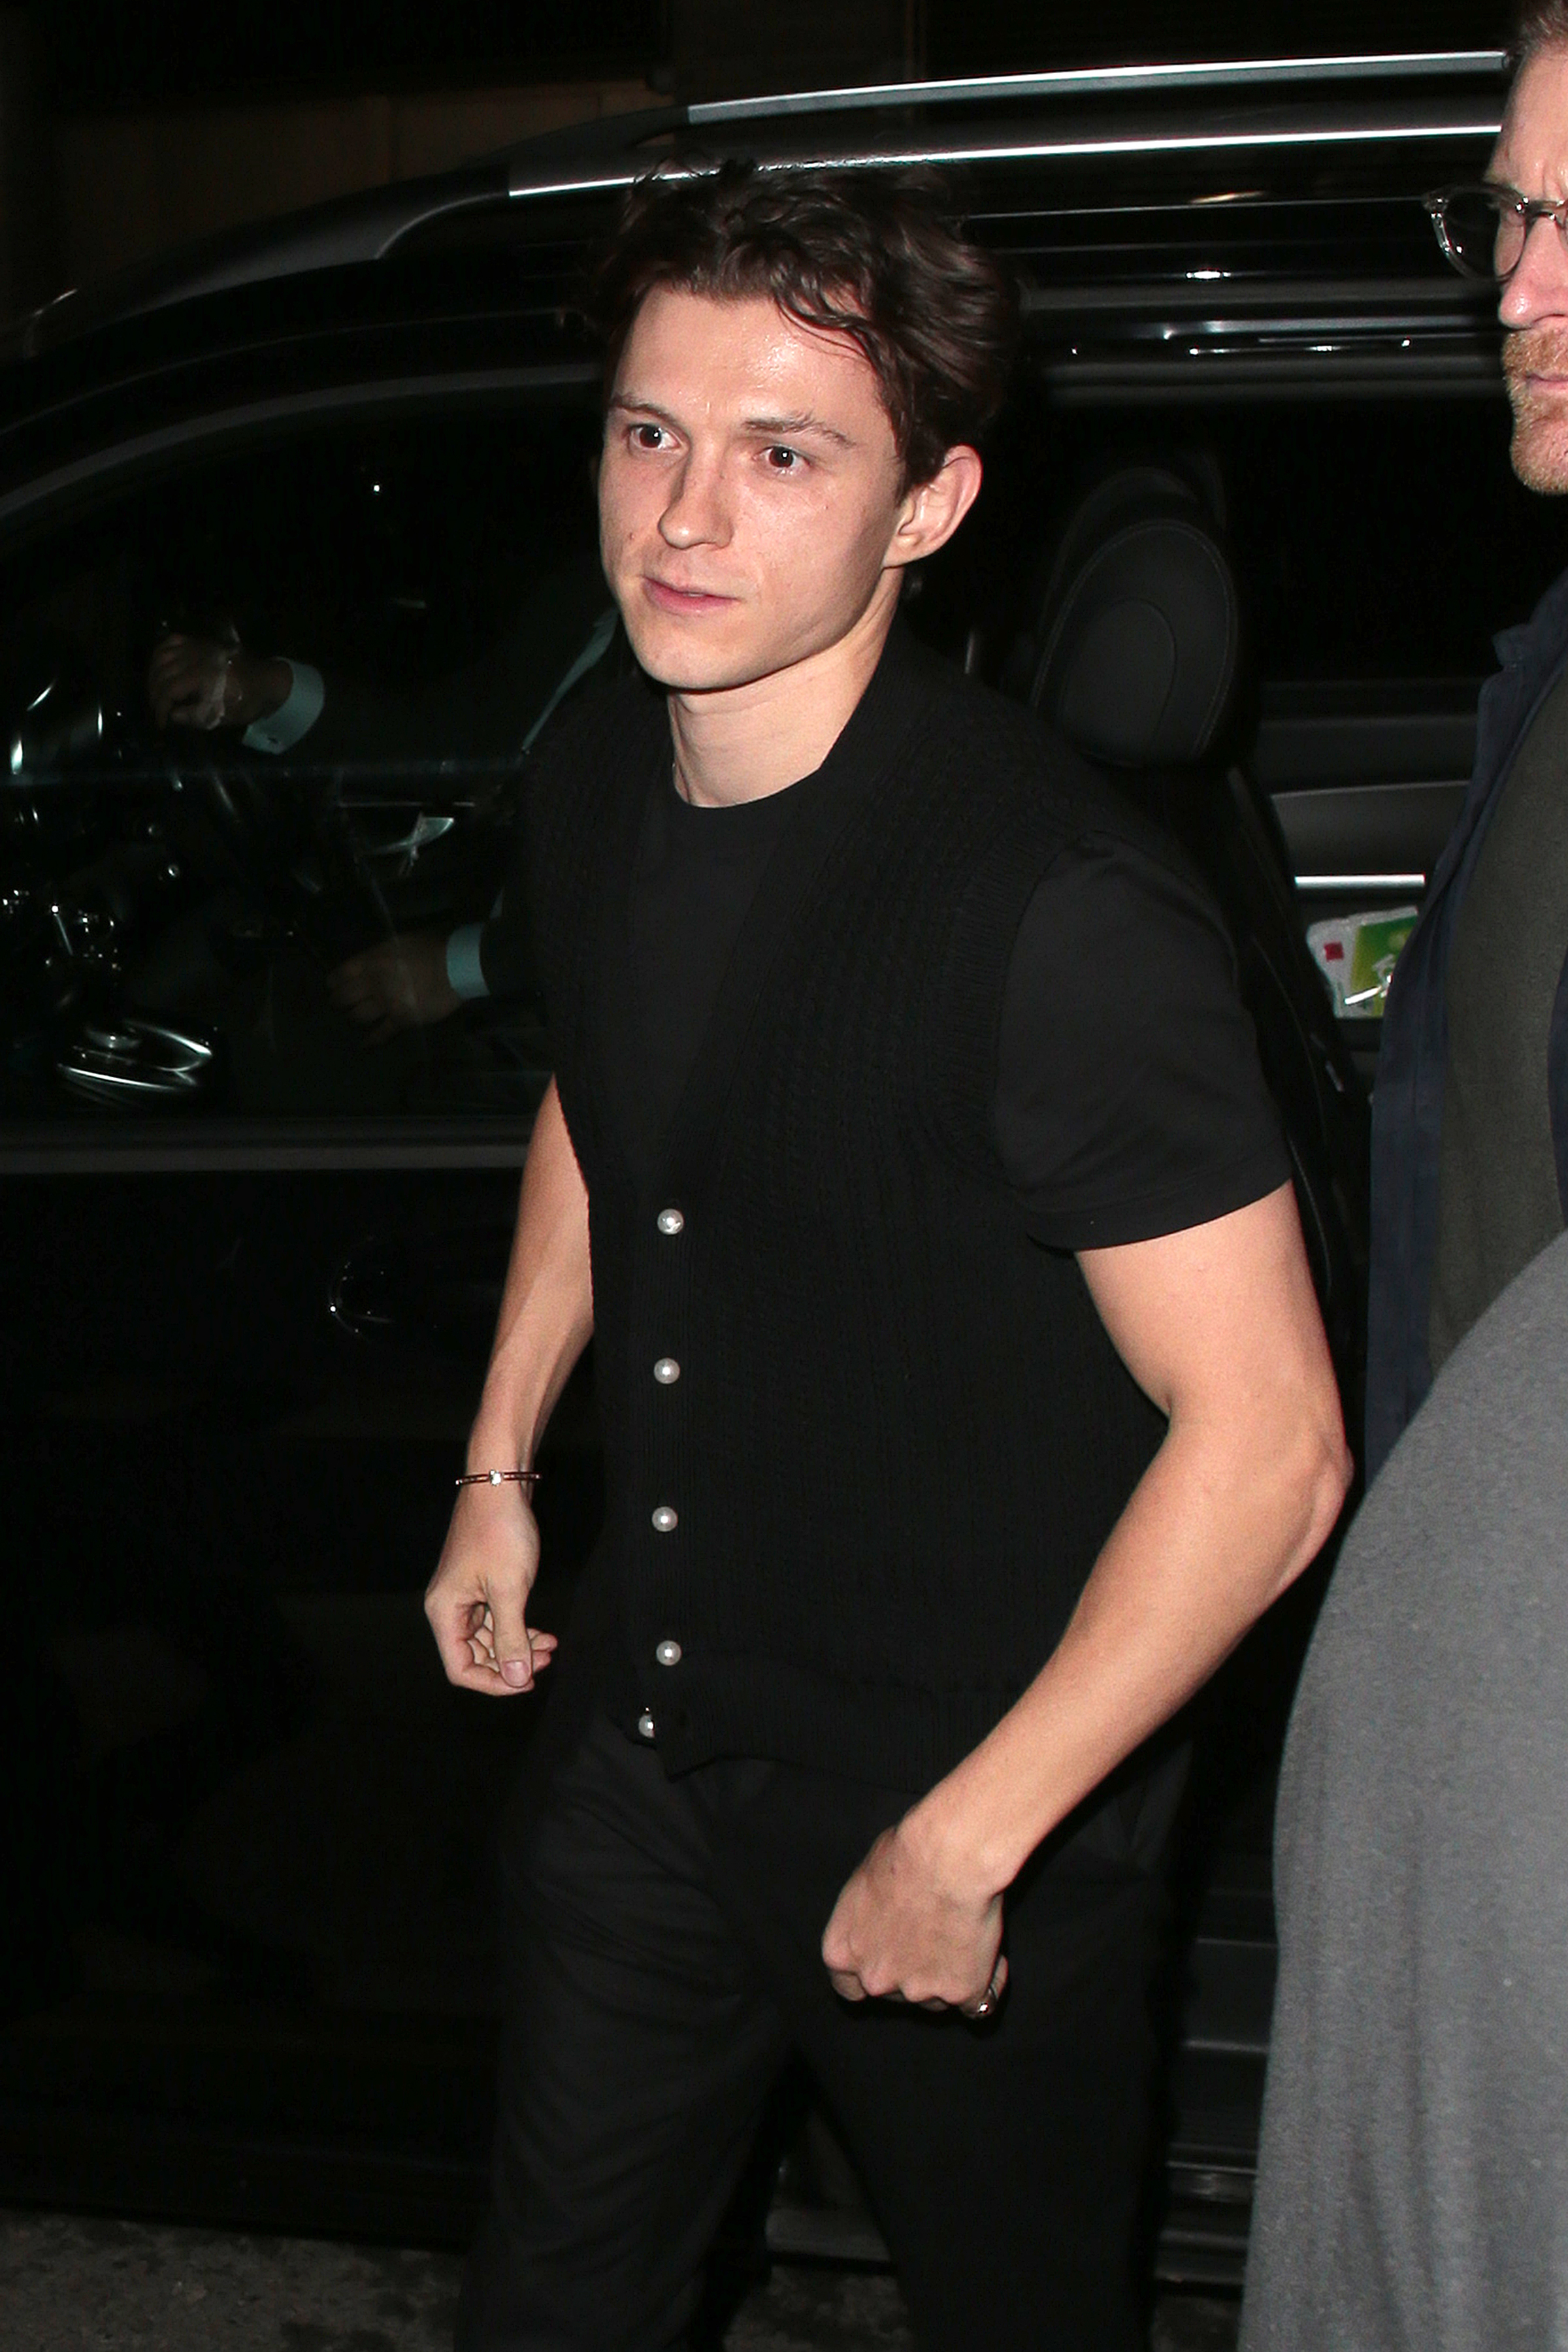 Tom Holland in a casual sleeveless top and trousers, exiting a vehicle